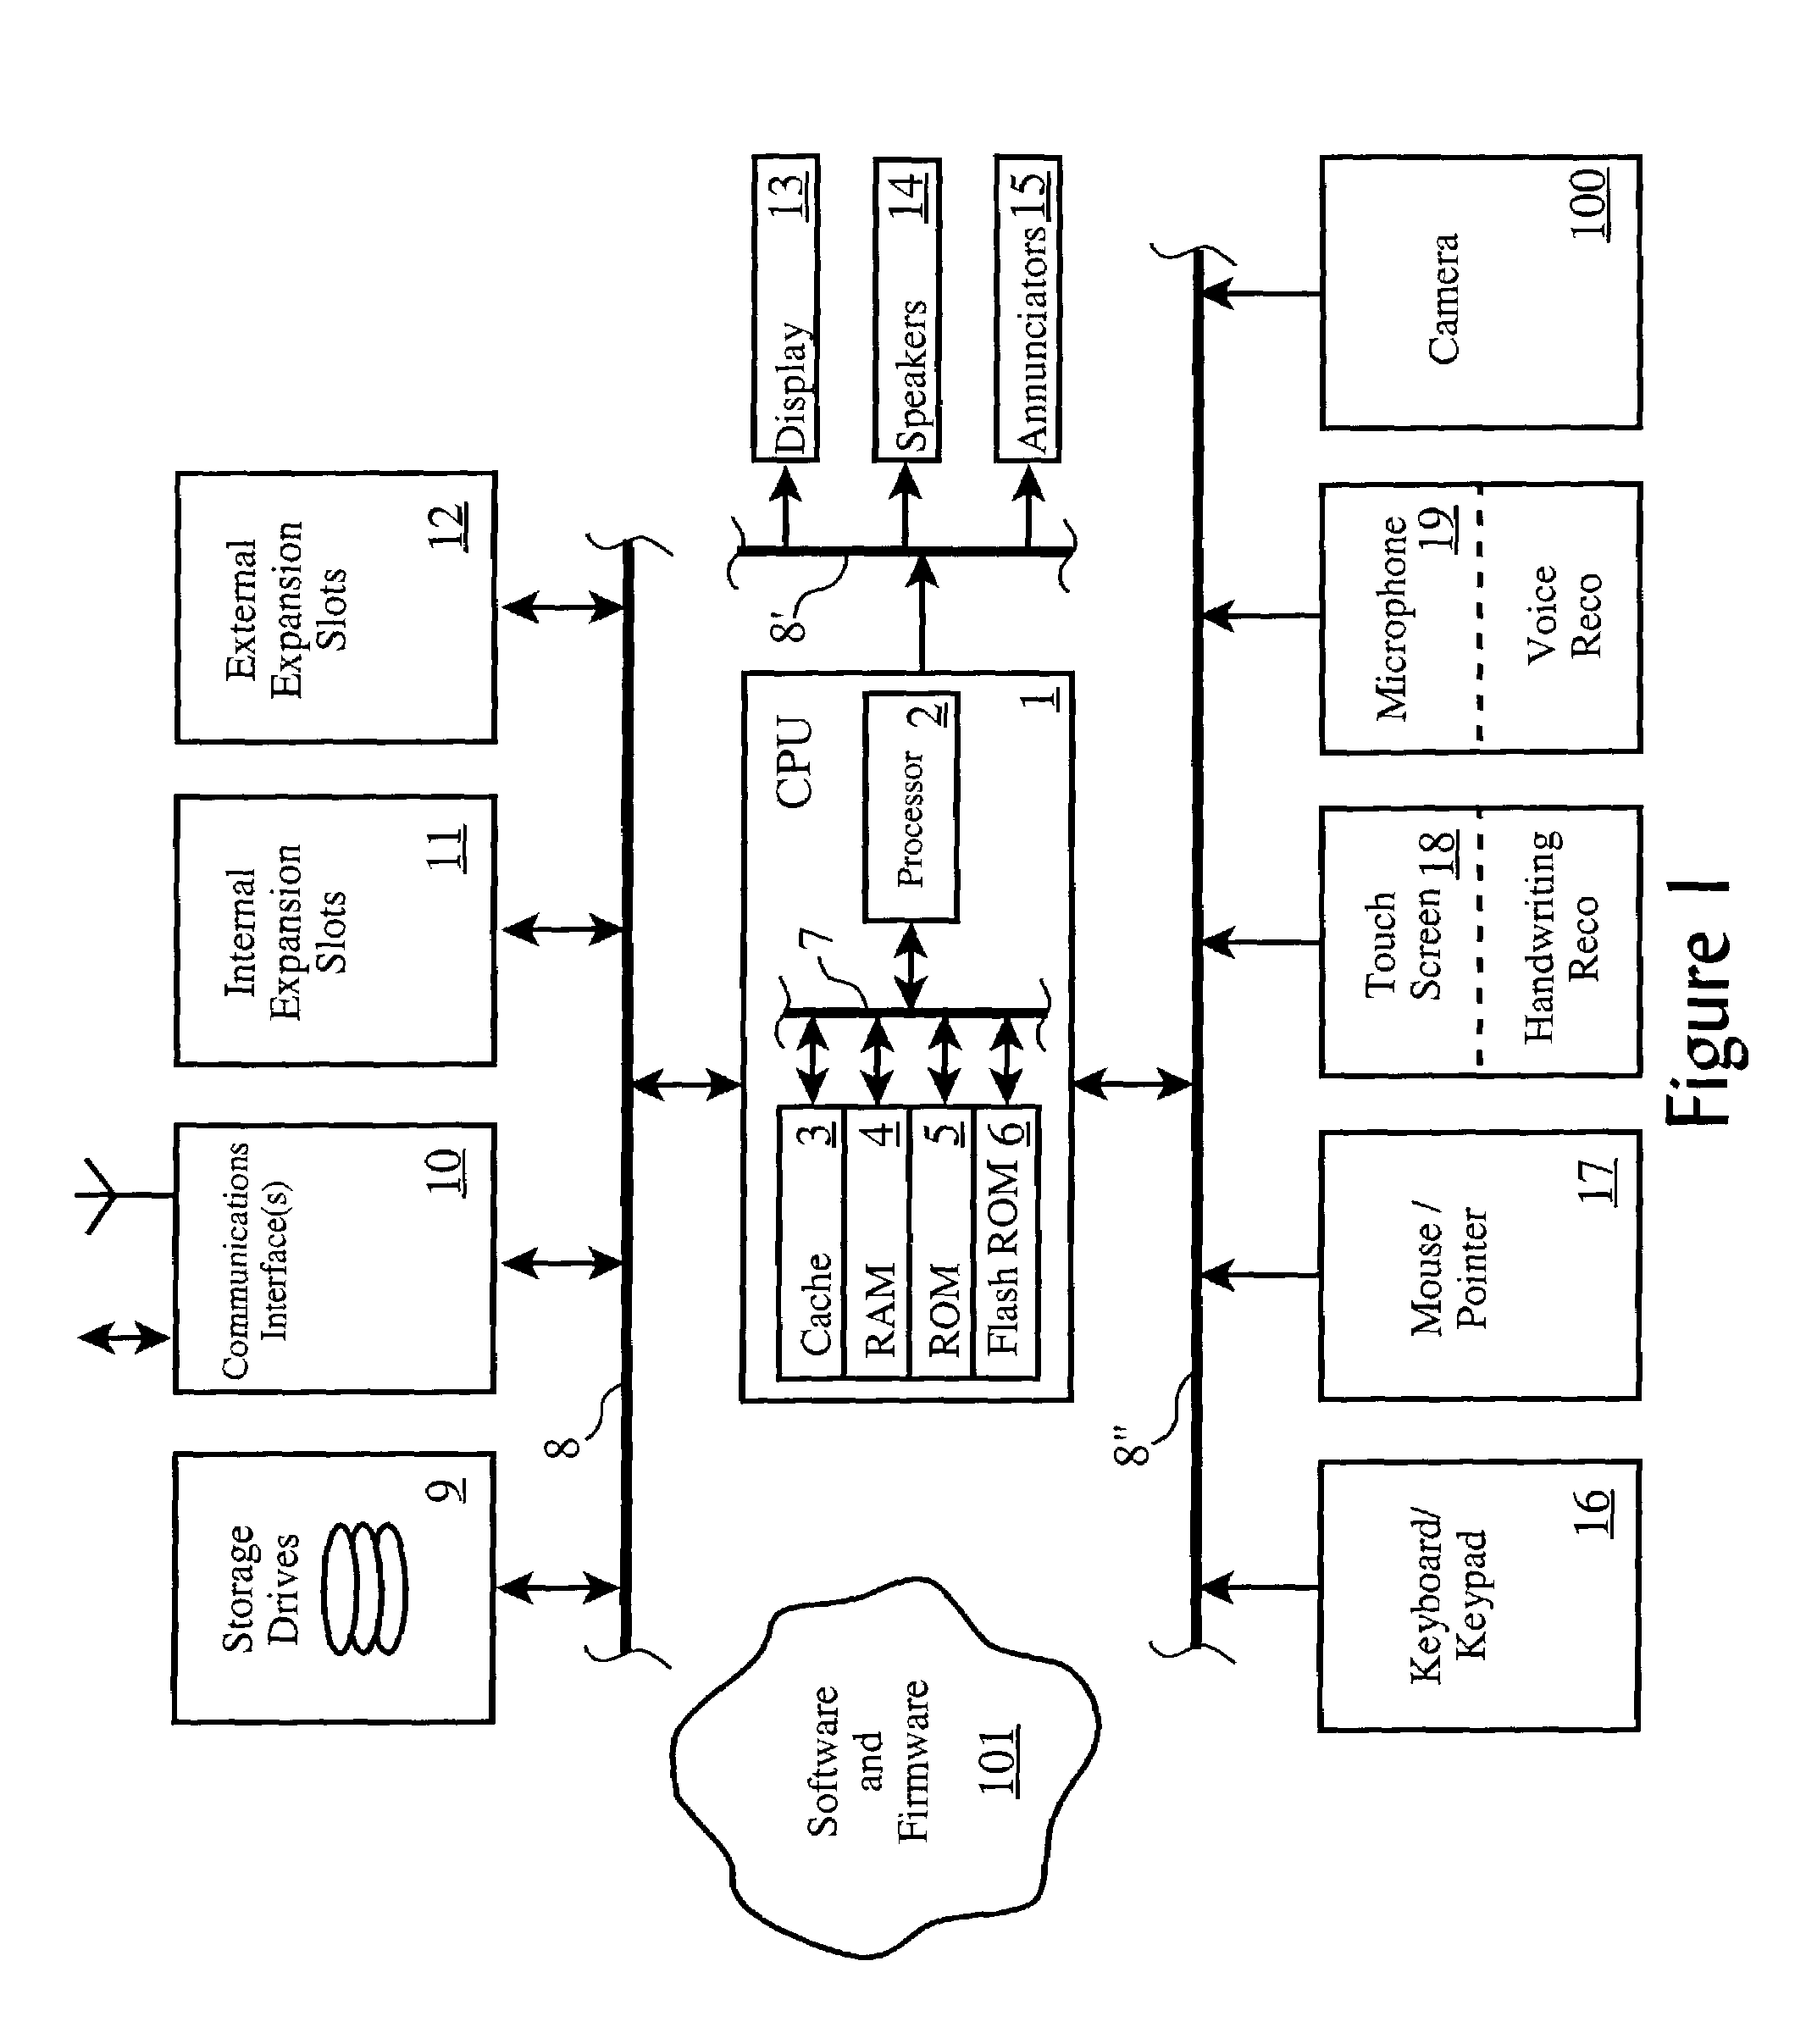 Rendering system and method for images having differing foveal area and peripheral view area resolutions